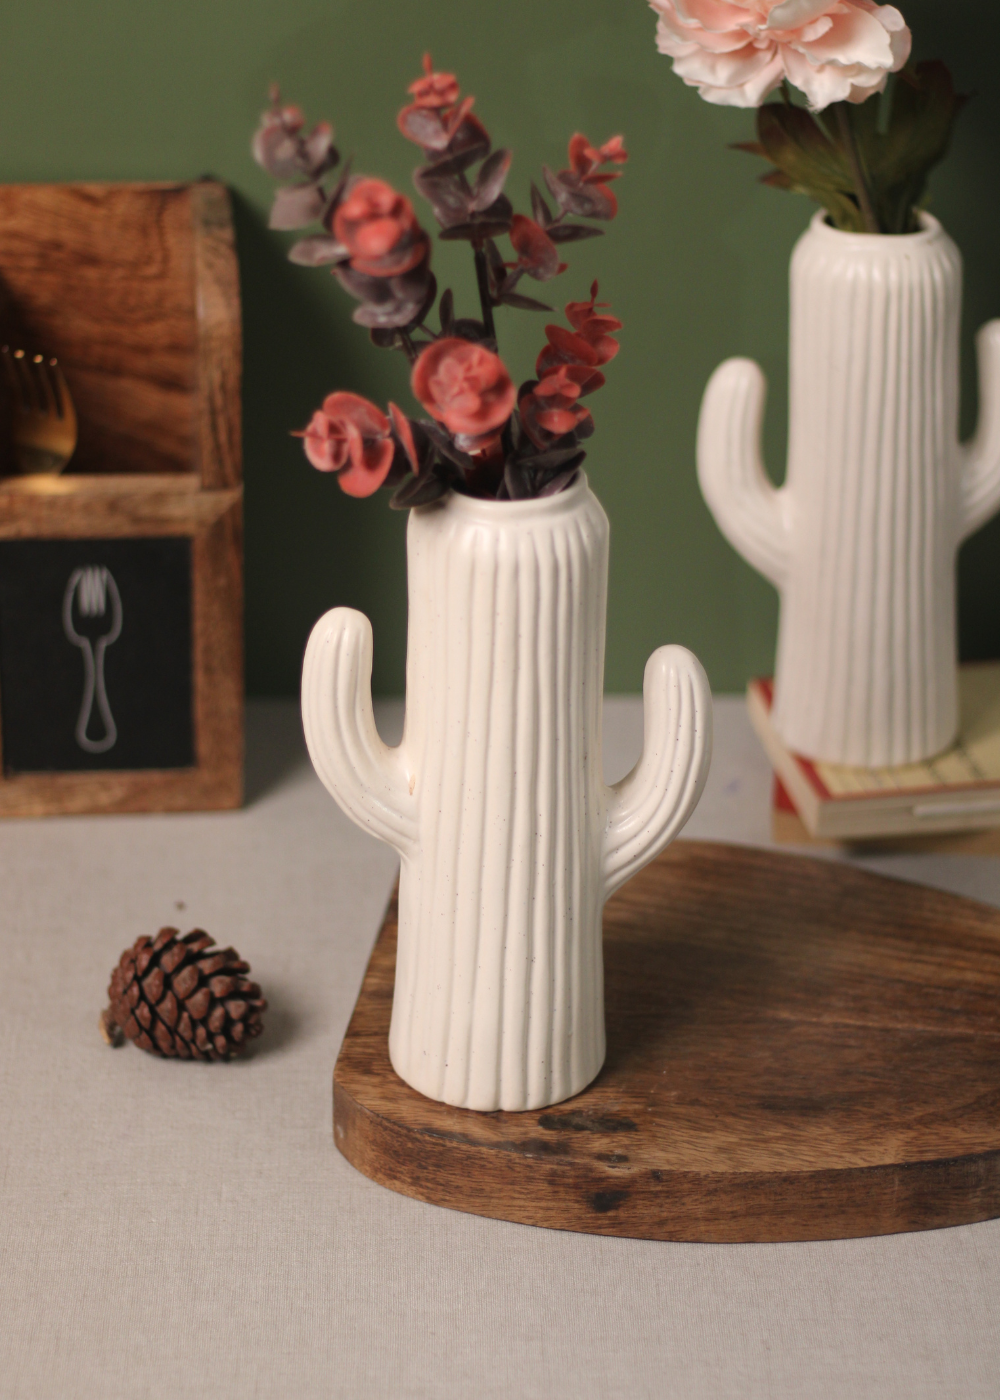 Two white cactus vase with flowers